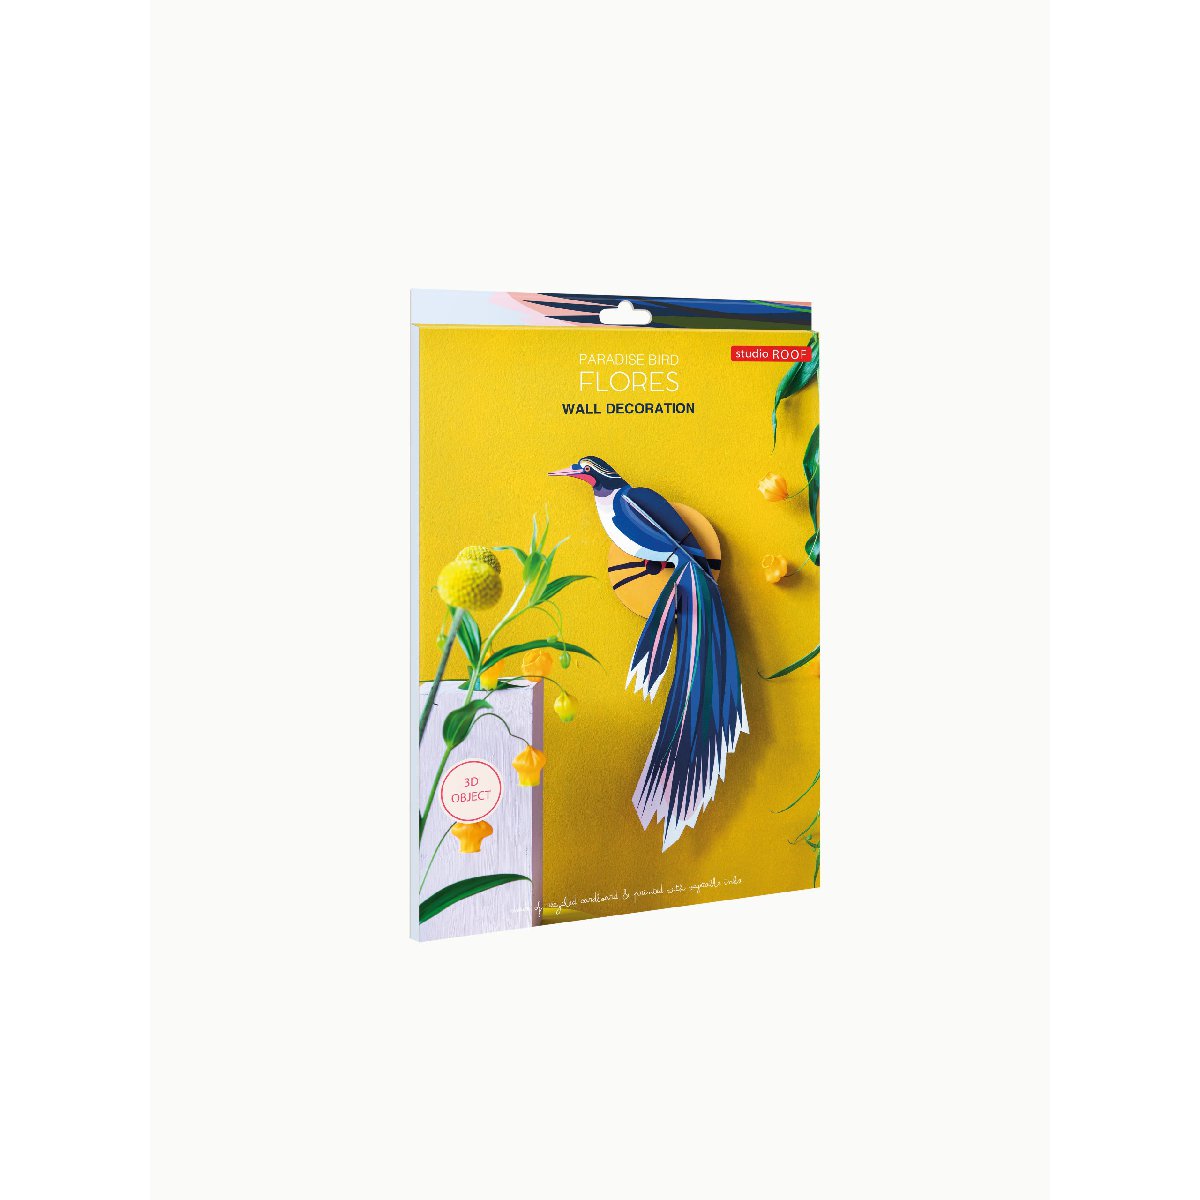 Studio Roof | paradise bird flores wall decor - package